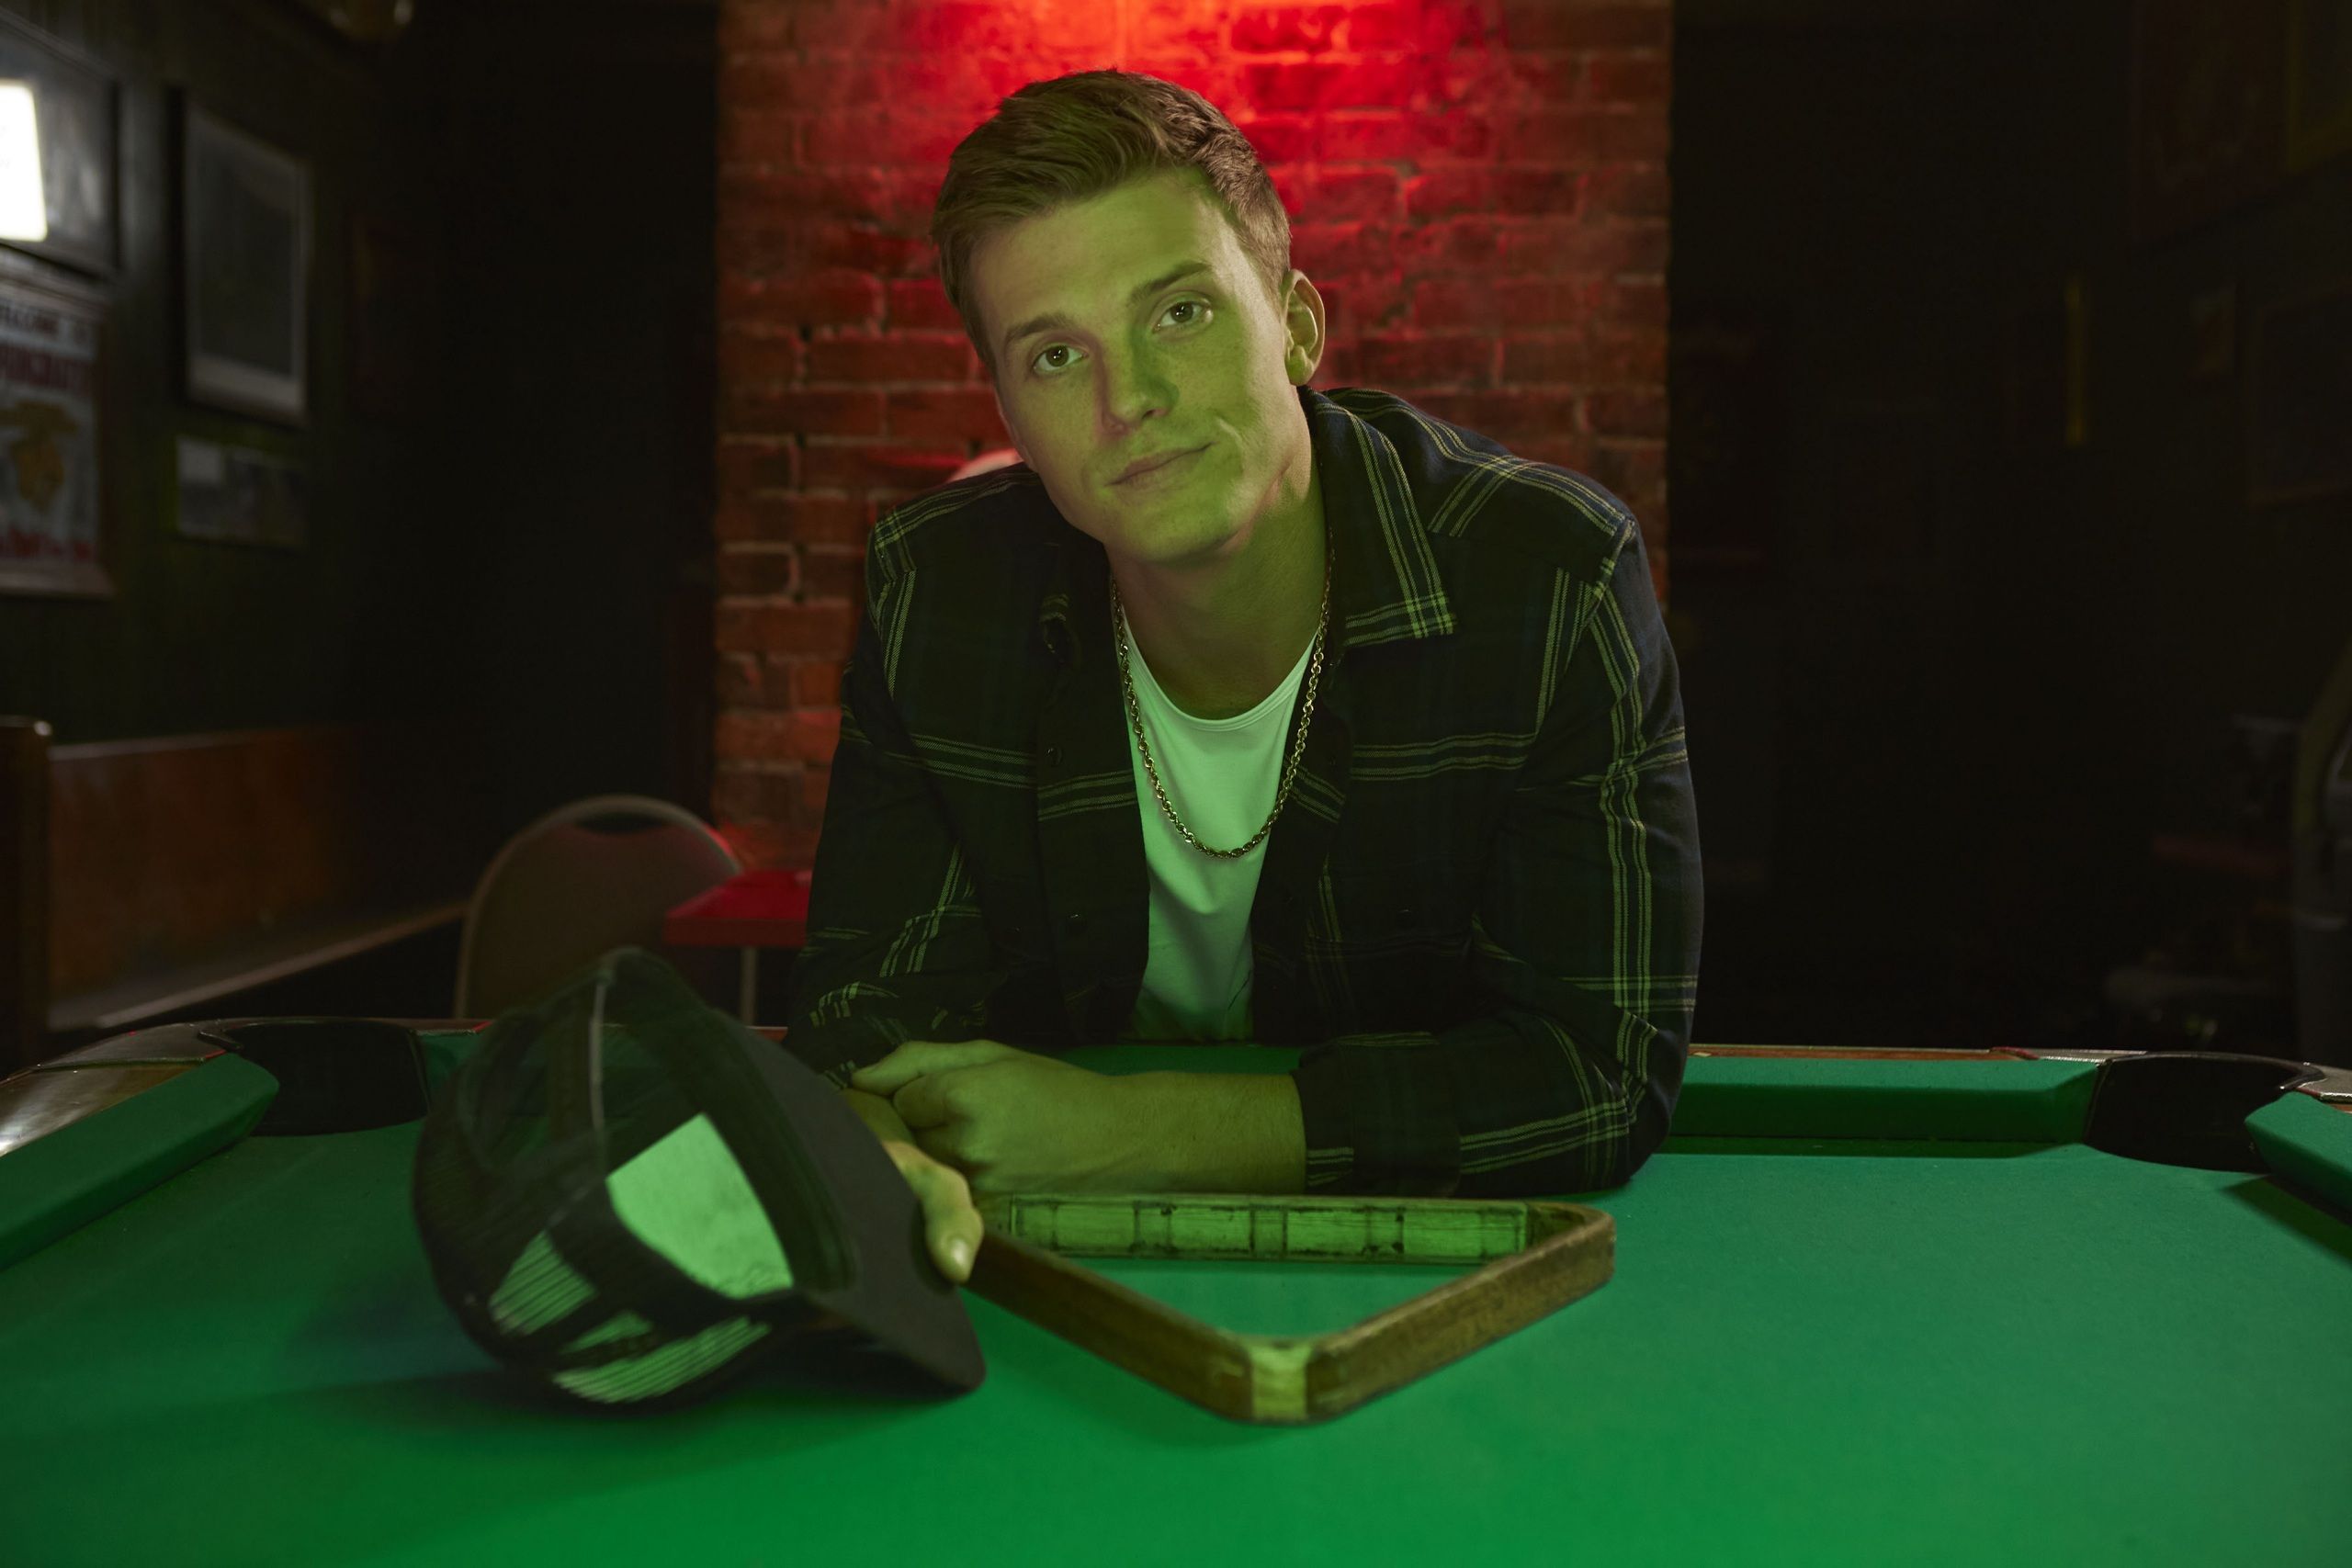 PARKER MCCOLLUM RELEASES TO BE LOVED BY YOU MUSIC VIDEO UMG Nashville